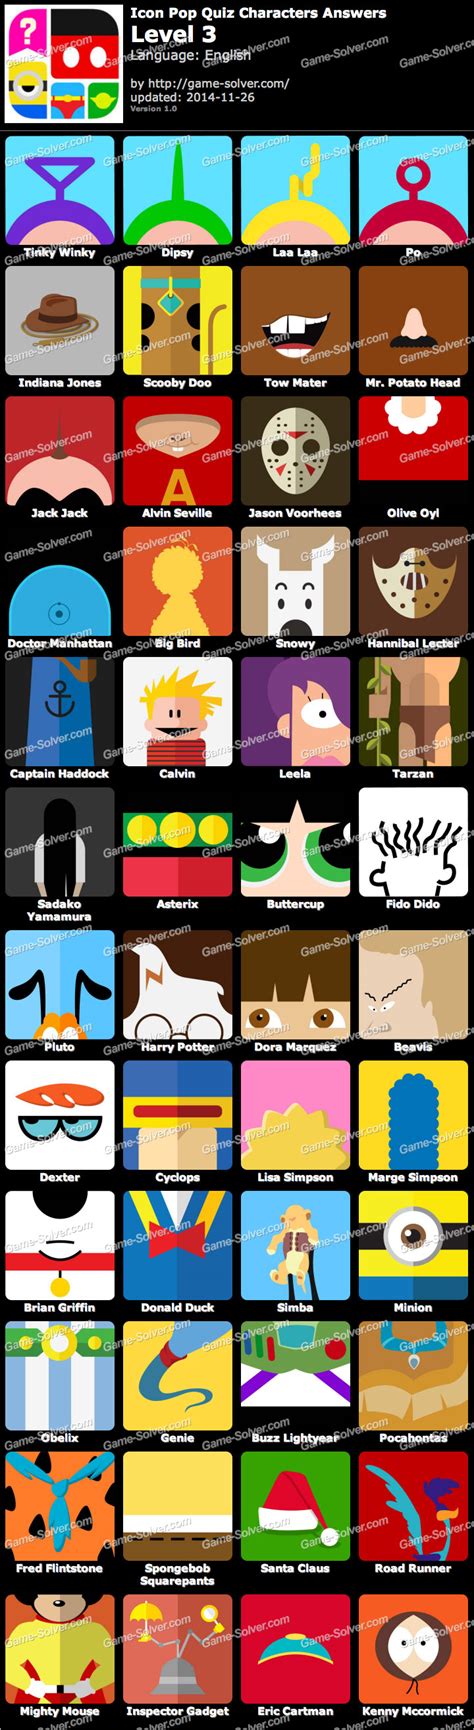 Icon Pop Quiz Characters Level 3 Game Solver